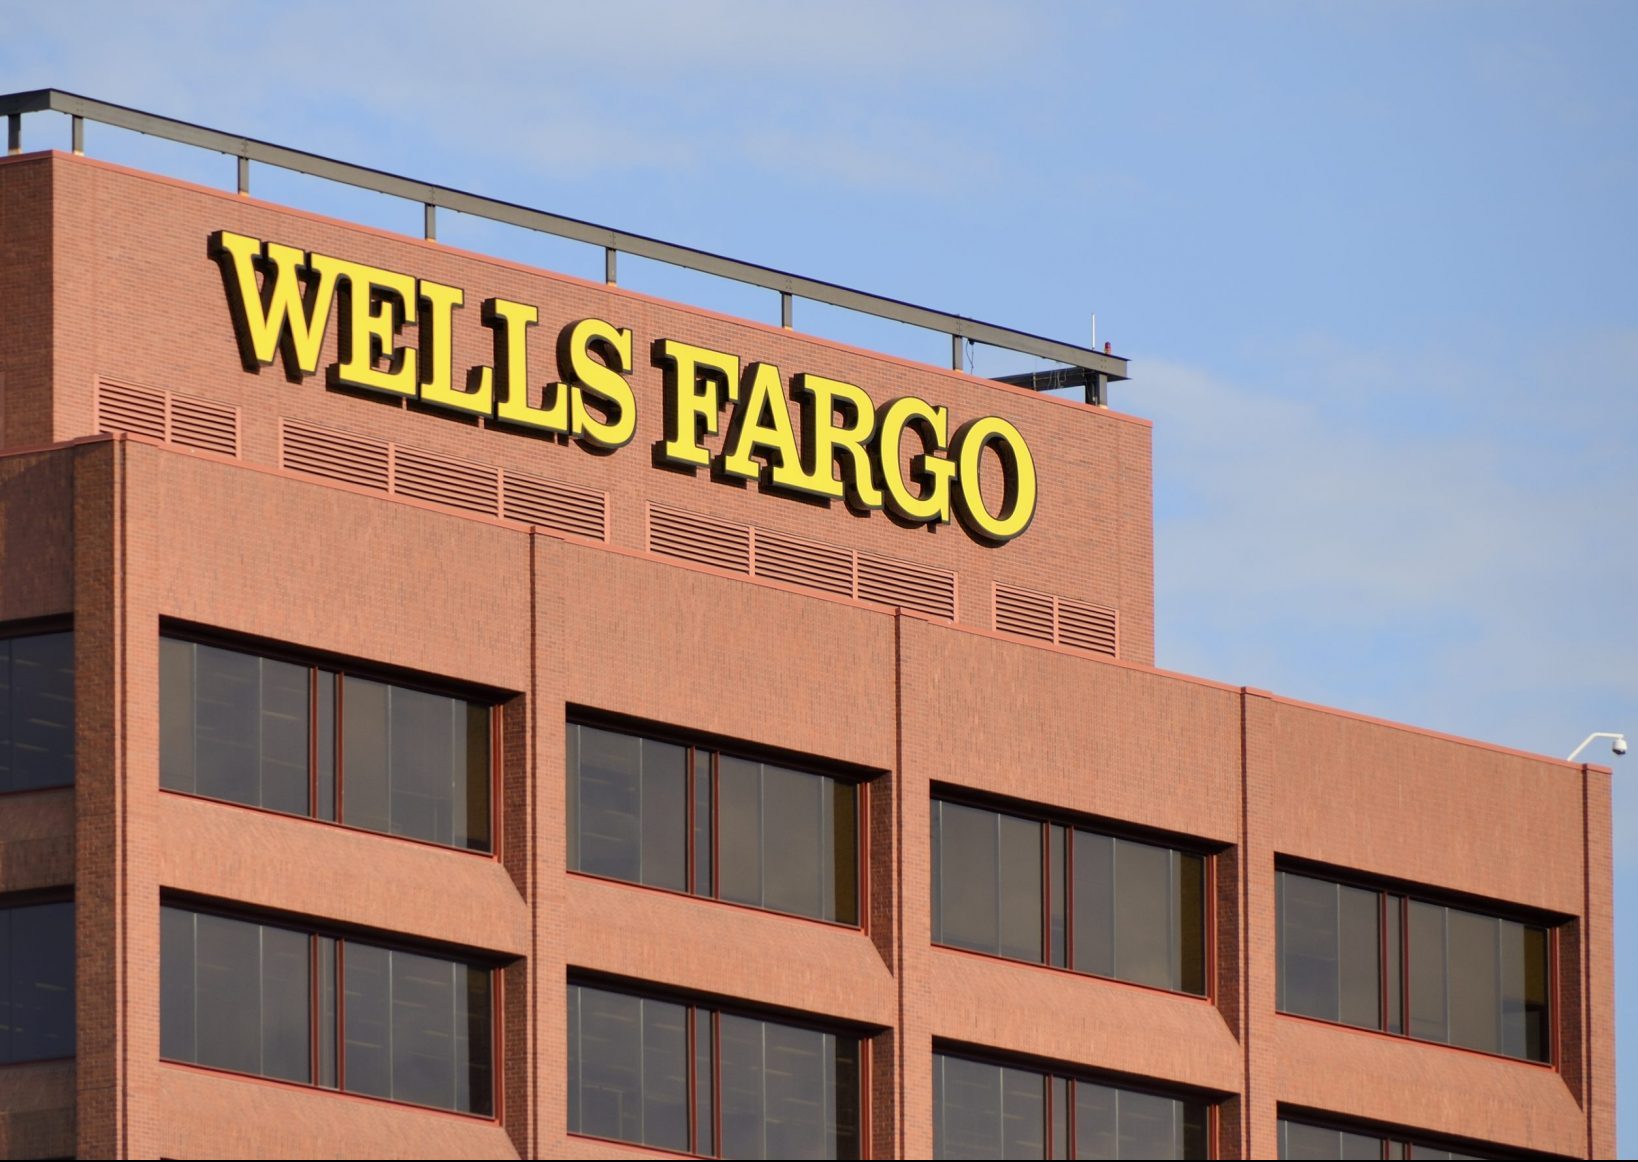 "Philadelphia, USA - June 6, 2012: Wells Fargo in downtown Philadelphia, Pennsylvania. Founded in 1852 in New York, Wells Fargo is a financial services company with operations around the globe."